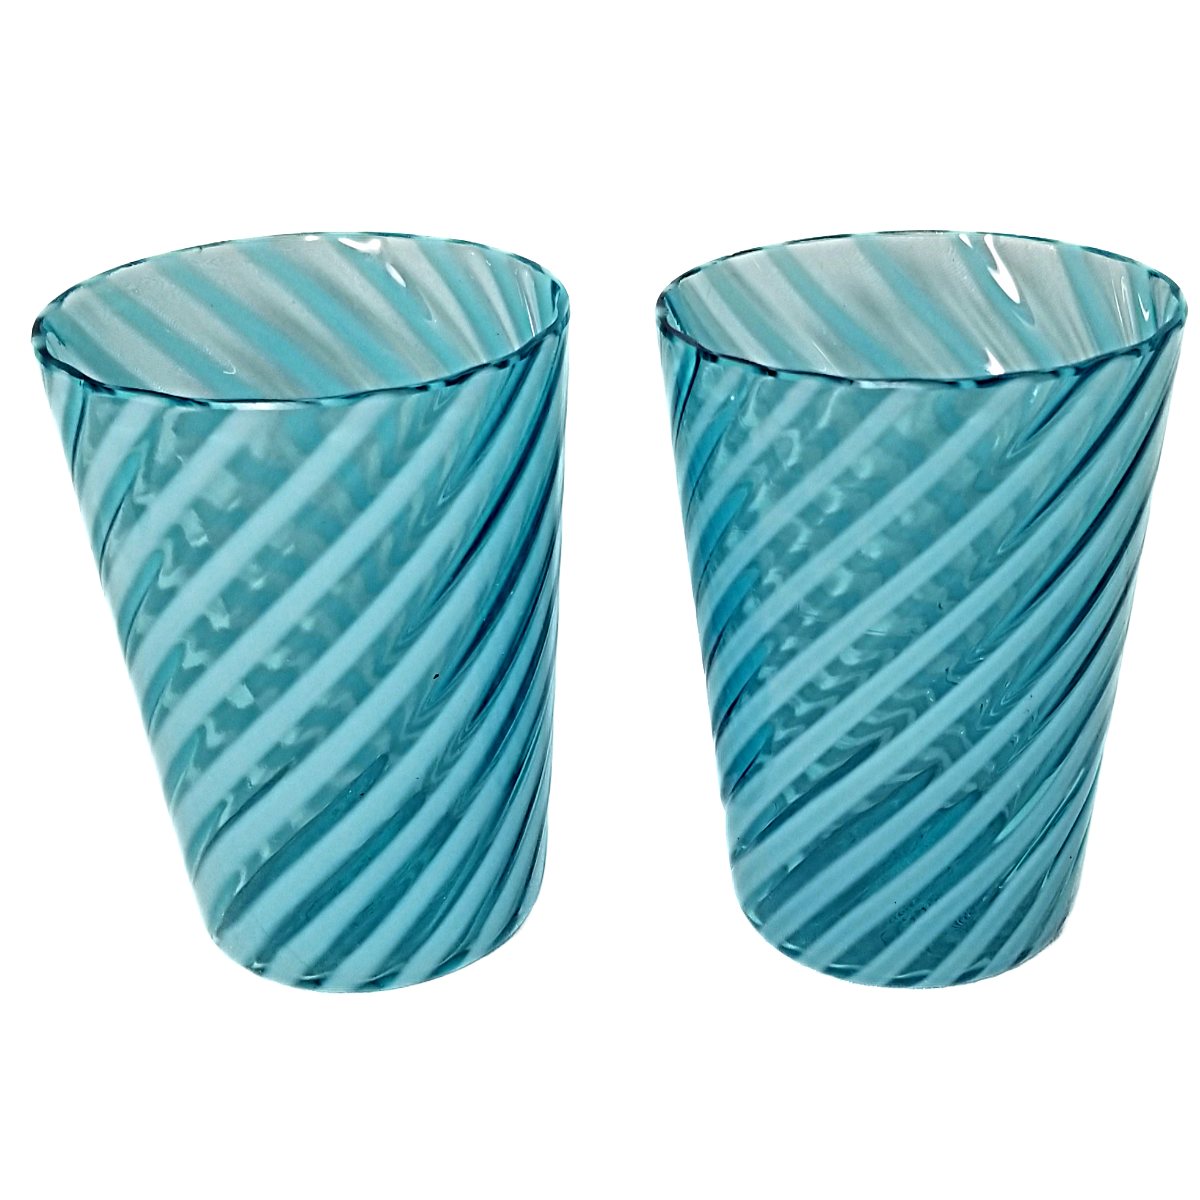 4 Vintage Jewel Tone Tumblers, Plastic Ribbed Tumblers by Majestic in the  Images Pattern 